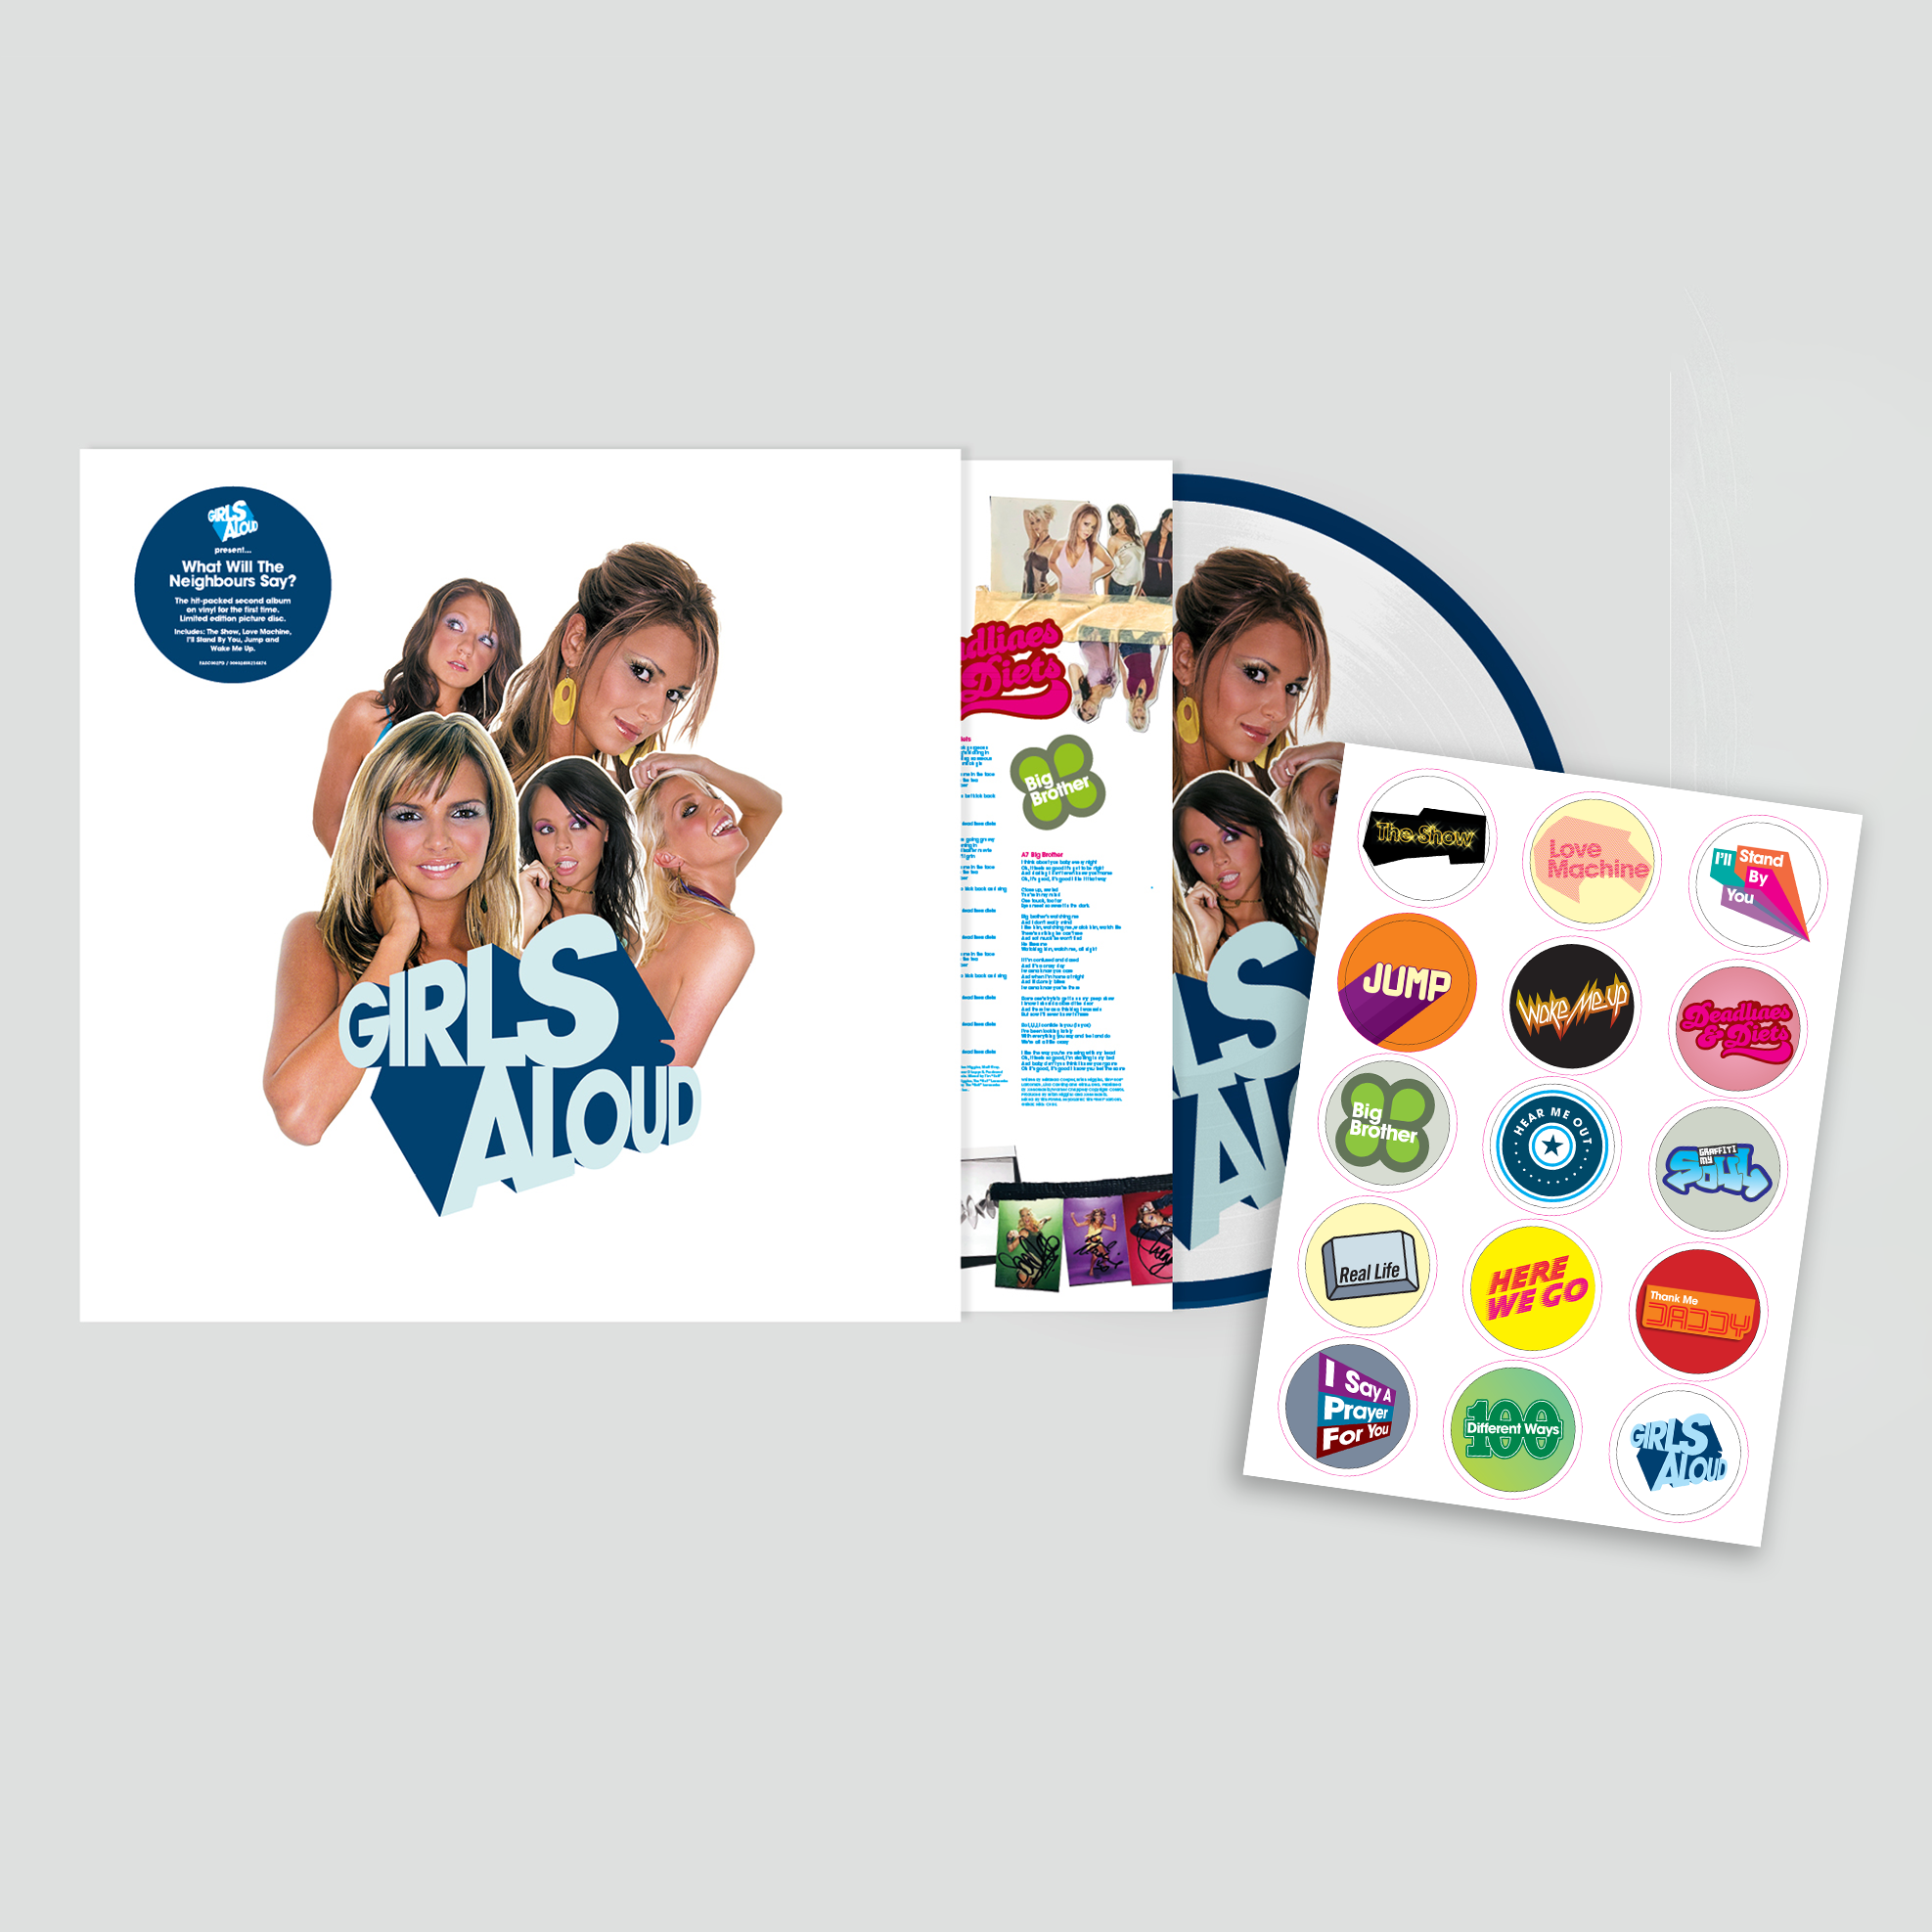 What Will The Neighbours Say (Deluxe Edition): Limited Picture Disc Vinyl LP + A4 Sticker Sheet